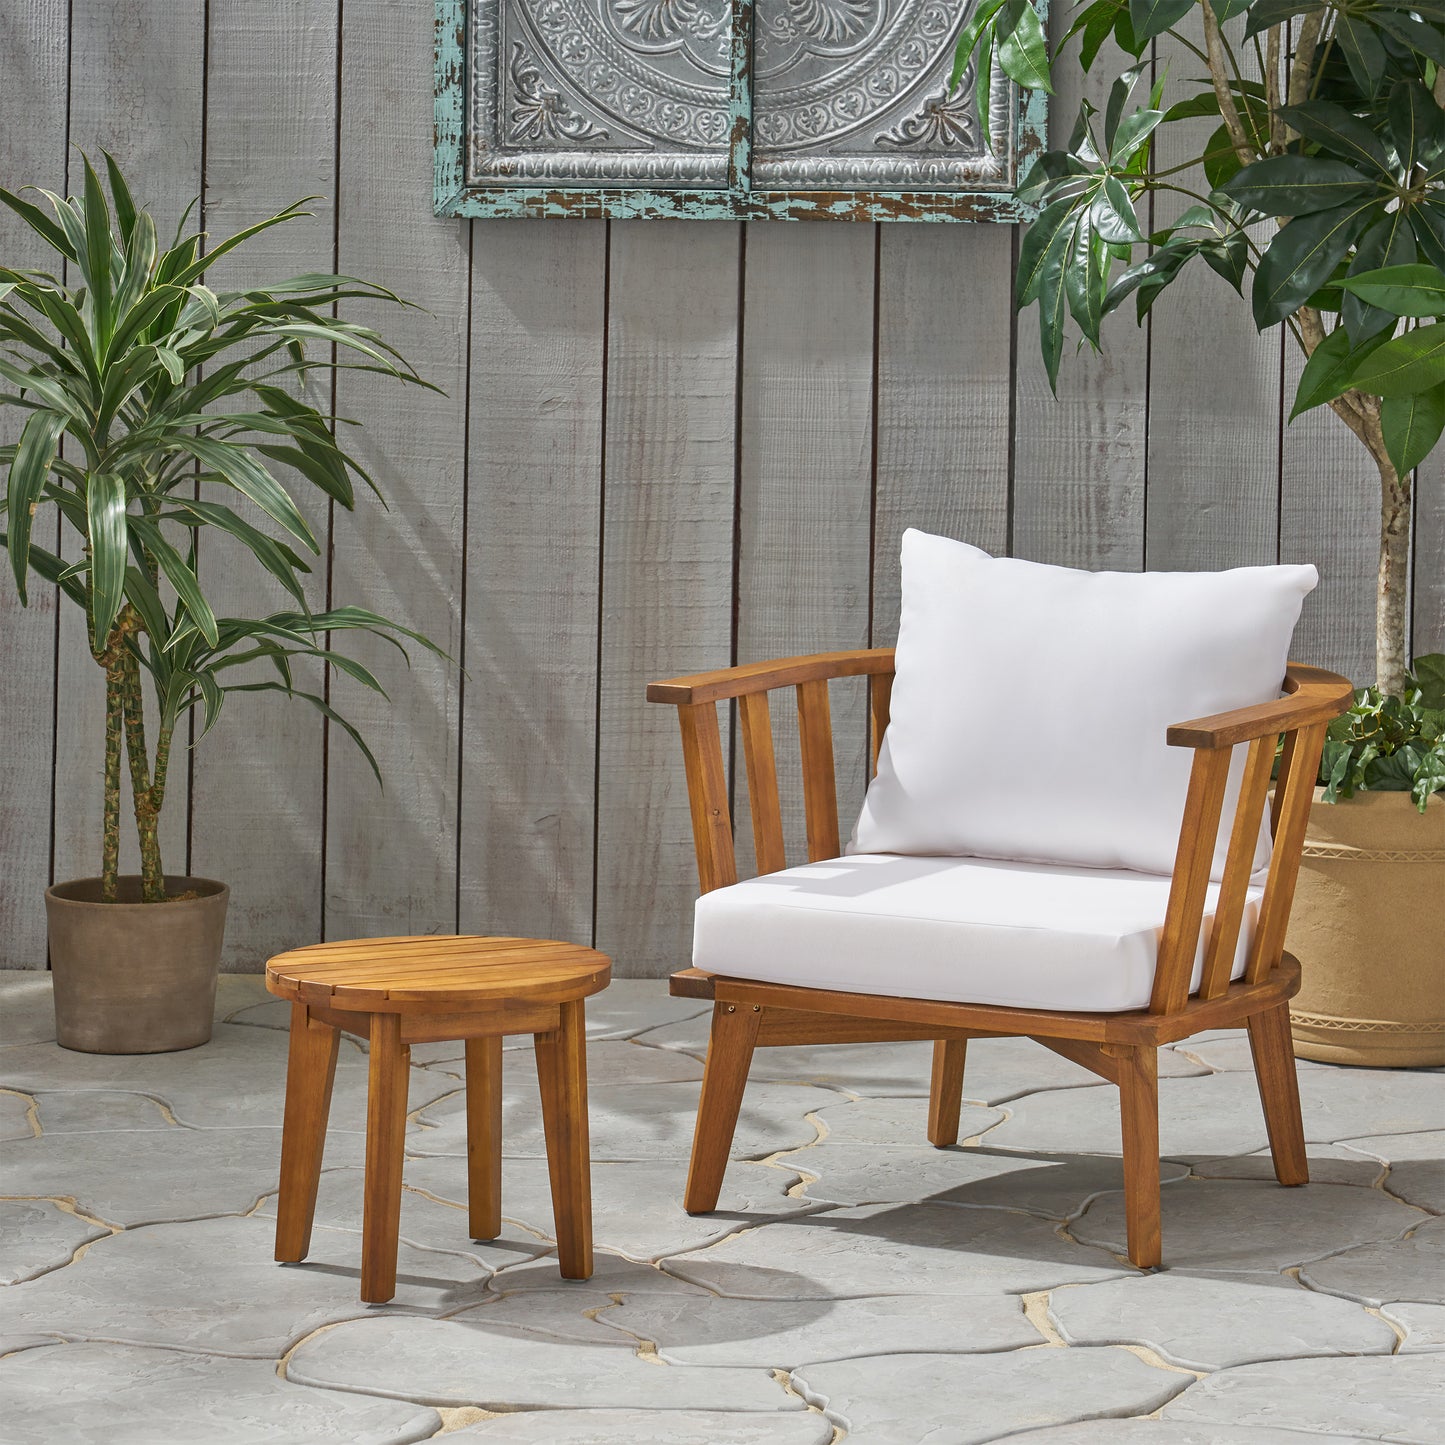 Murray Outdoor Acacia Wood Club Chair and Side Table Set